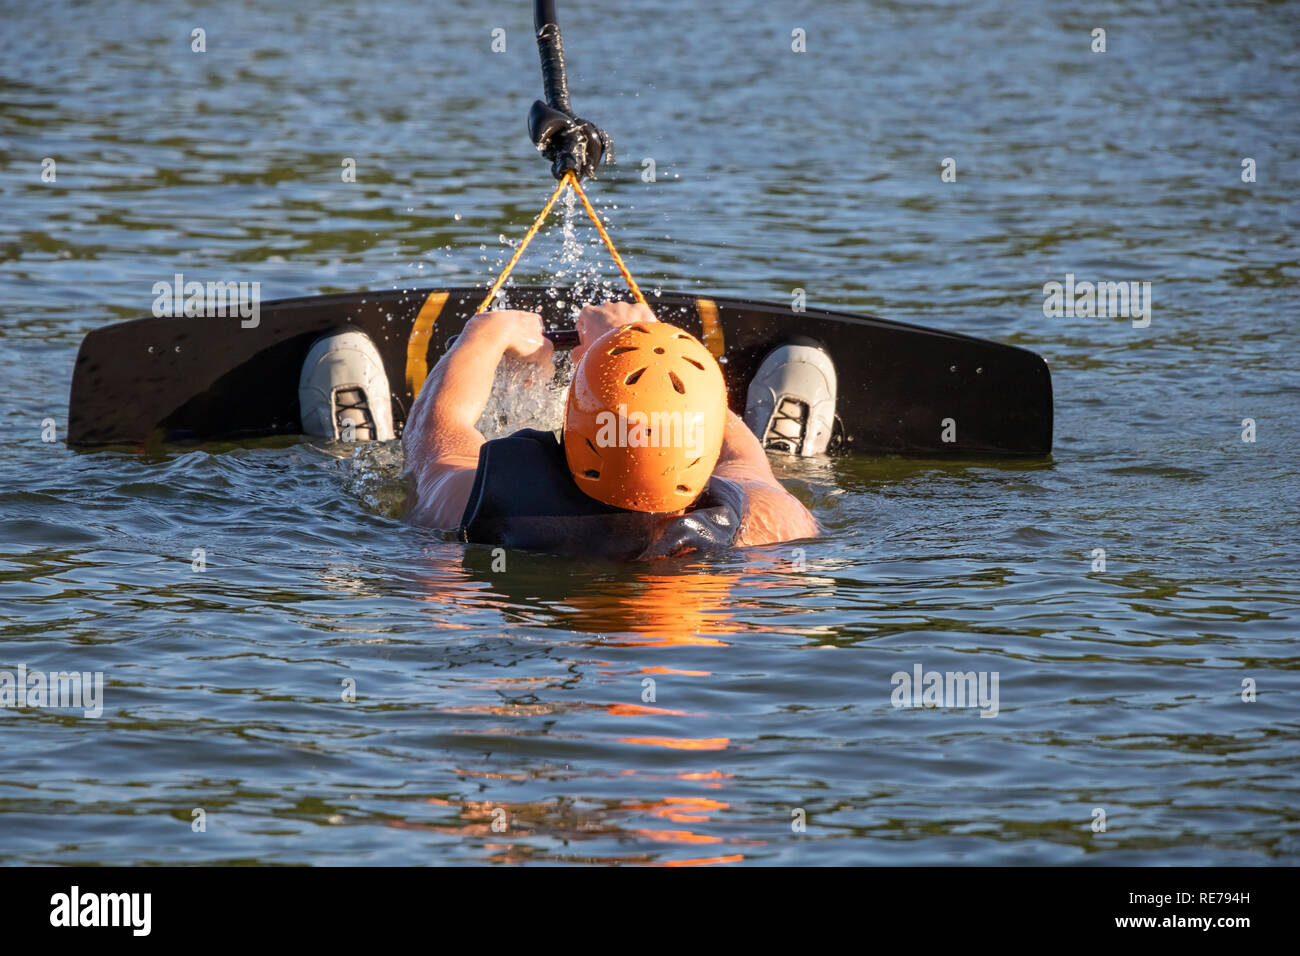 Wakeboarder holding rope and taking off from water Stock Photo